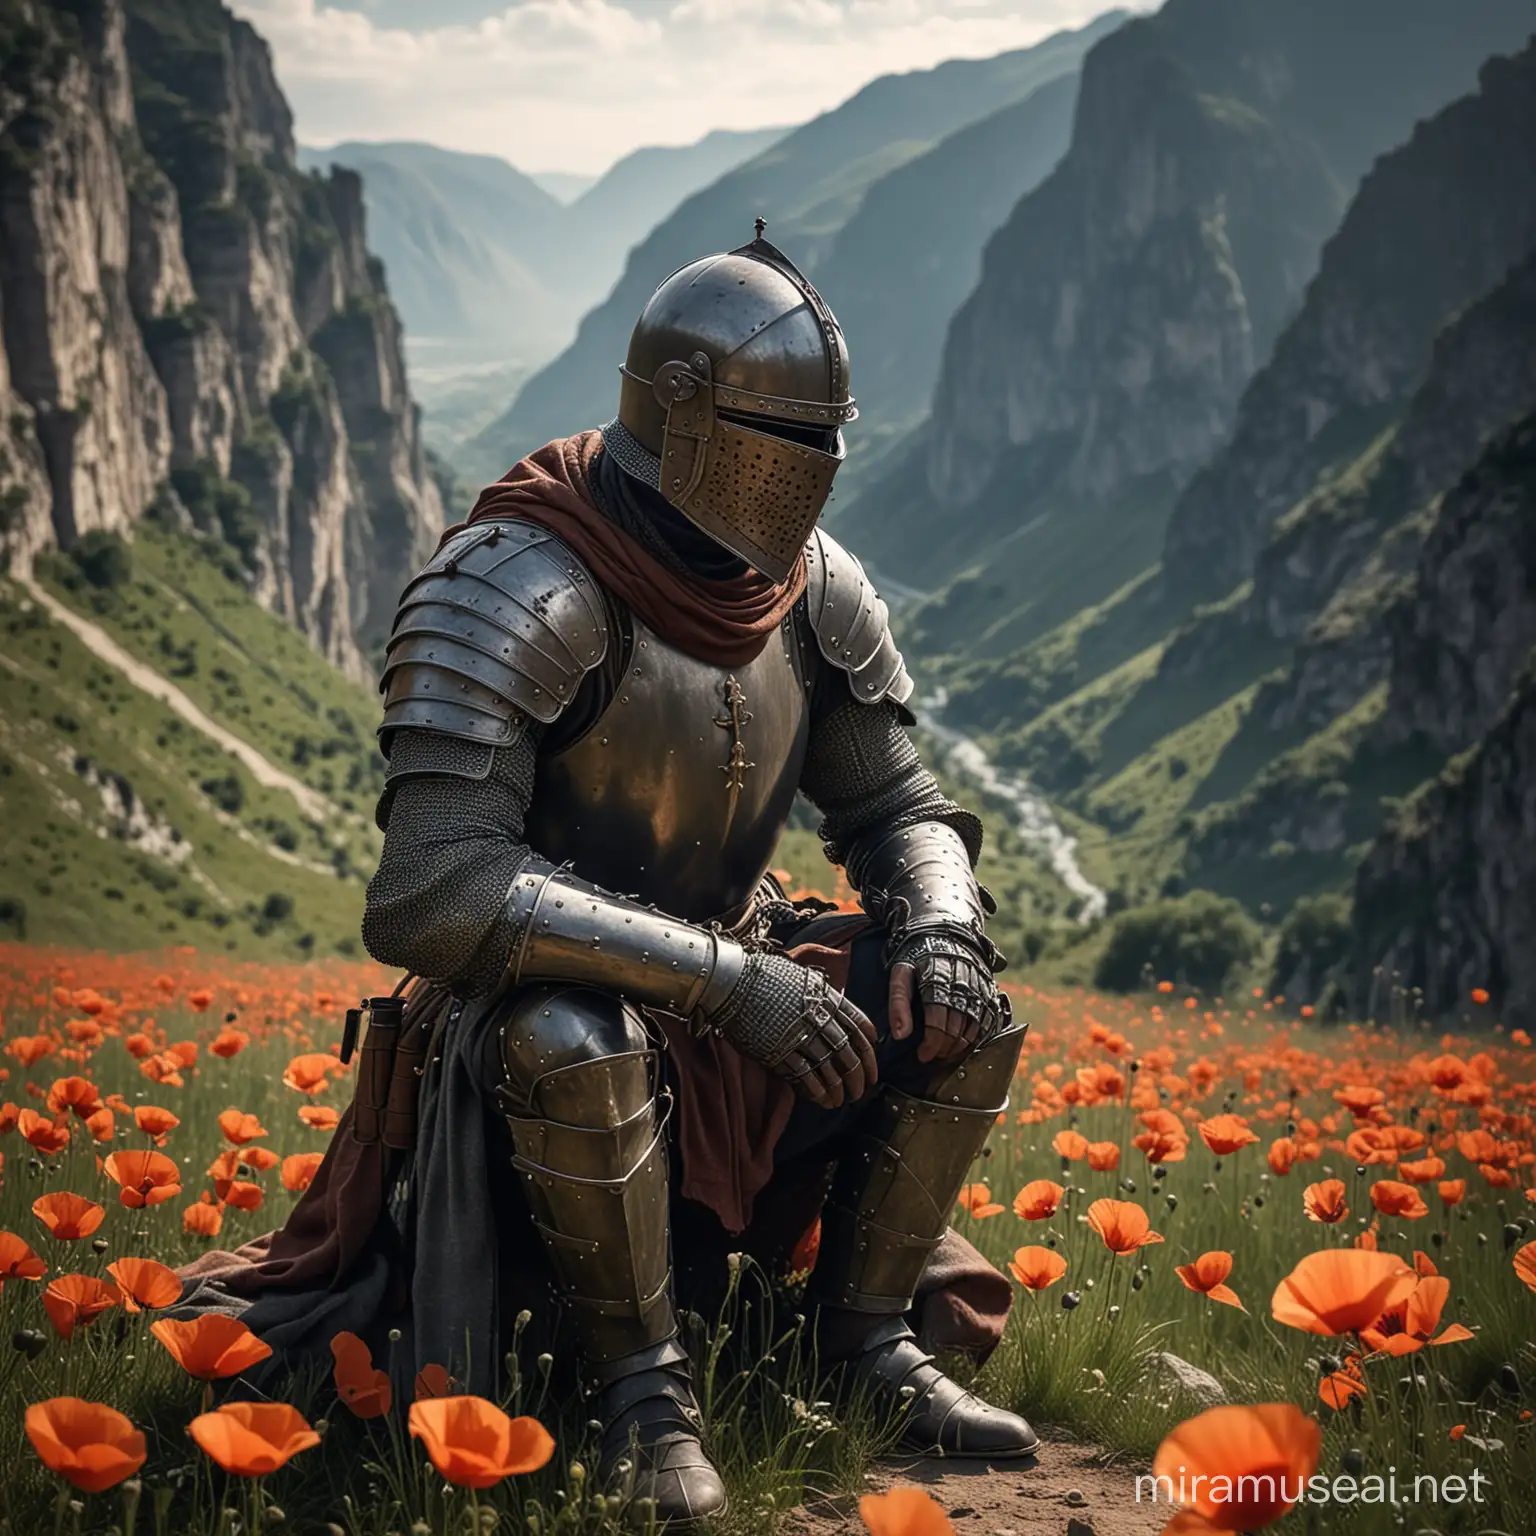 Generate an image of a medieval knight in full armor, including a helmet that completely covers his face so that not even his eyes are visible. The armor is dark and has many small details. The knight is in a pensive posture, looking down with melancholy. In his hands, he plays with some stones while seeming to think about something dramatic. He is seated in the middle of a field of poppies. In the background, a gorge between two large mountains is visible